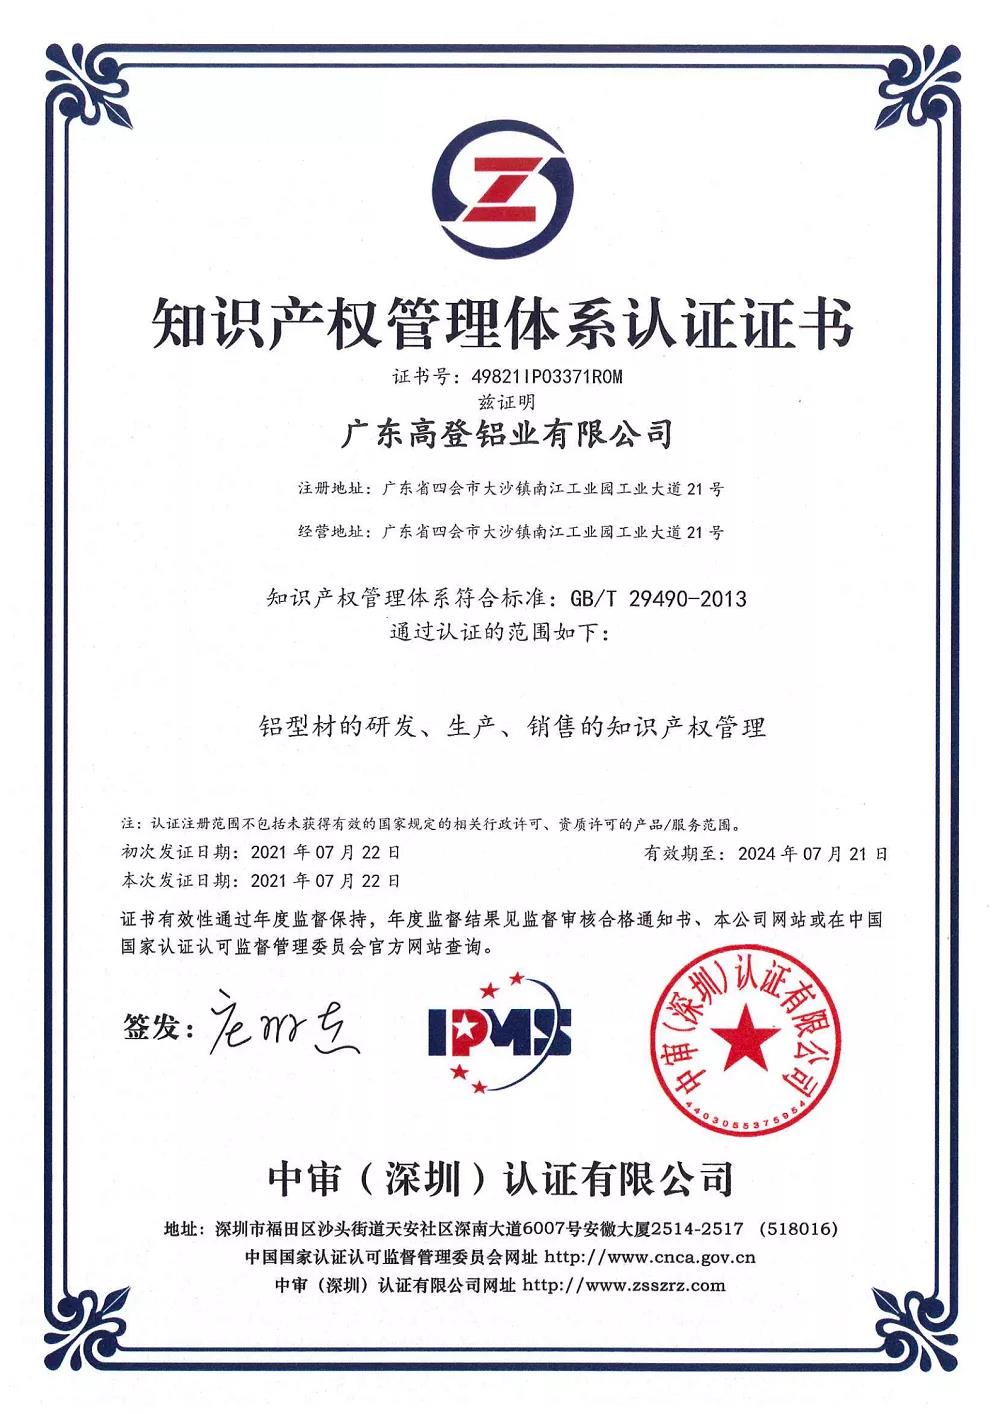 2021 Won the "Intellectual Property Management System Certification"